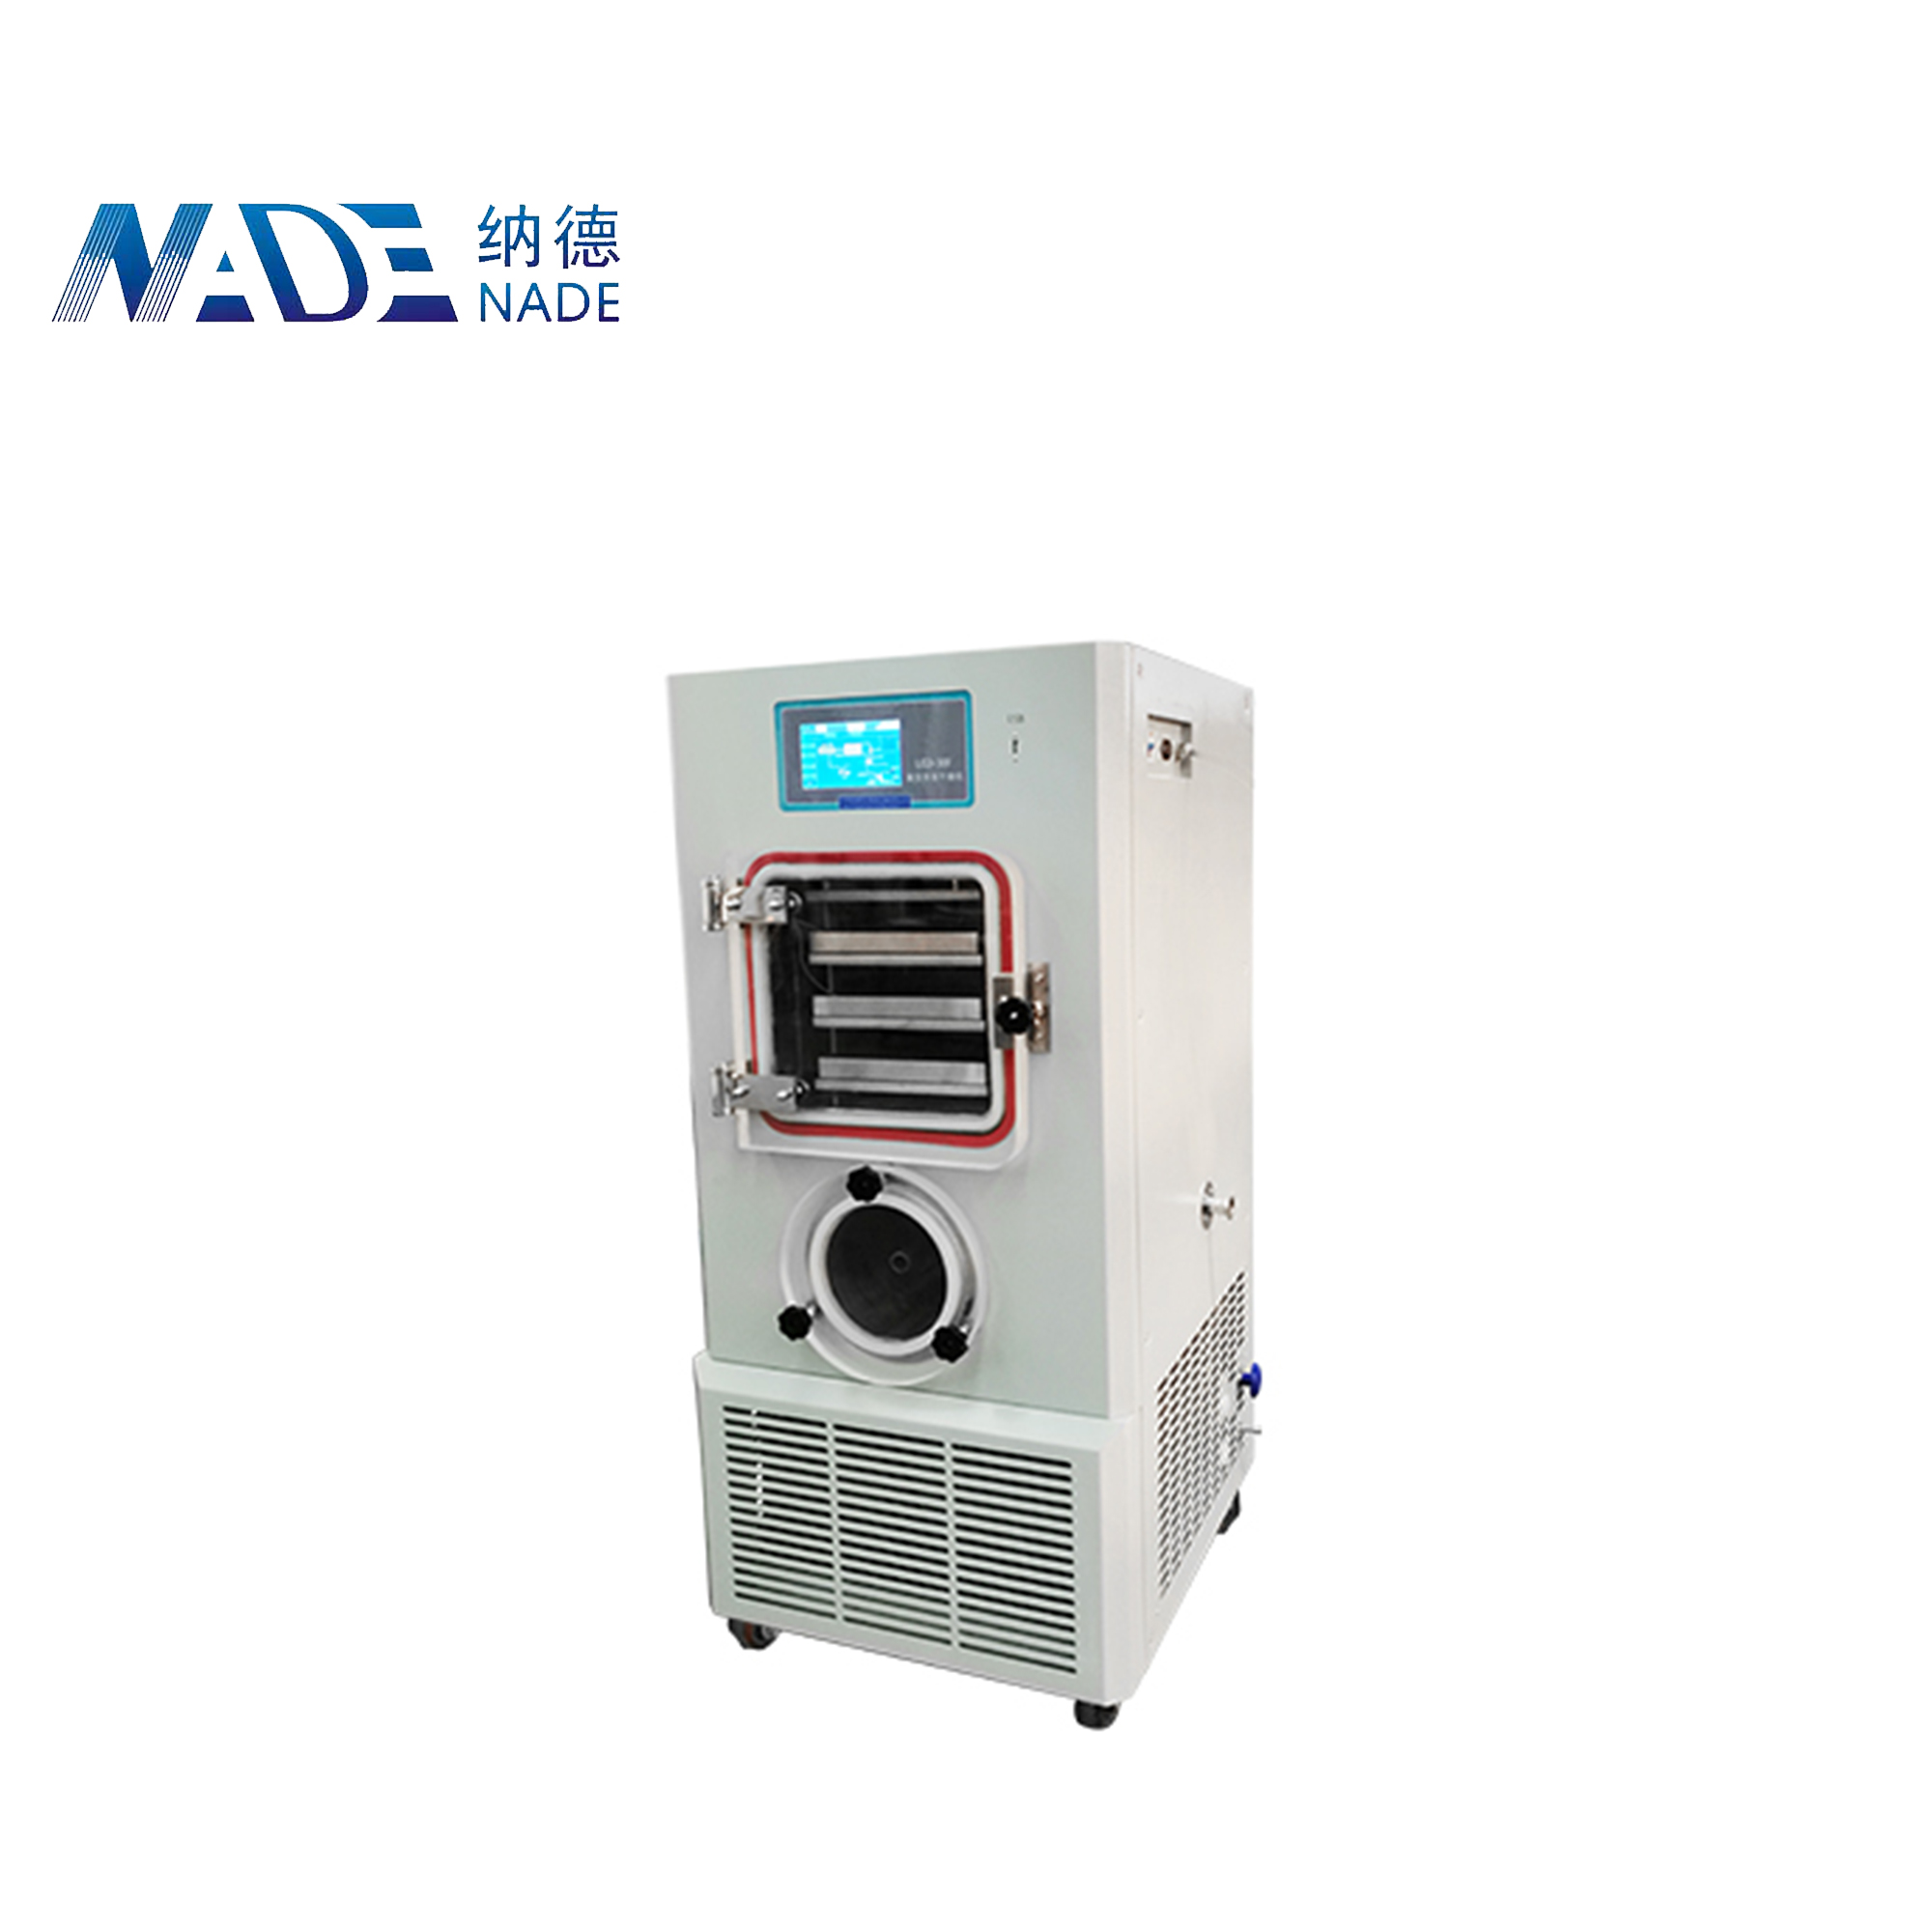 NADE LGJ-20F Standard Type Experimental Silicone Oil Heating Vacuum Lyophilizer/freeze drying equipment/freeze dryer